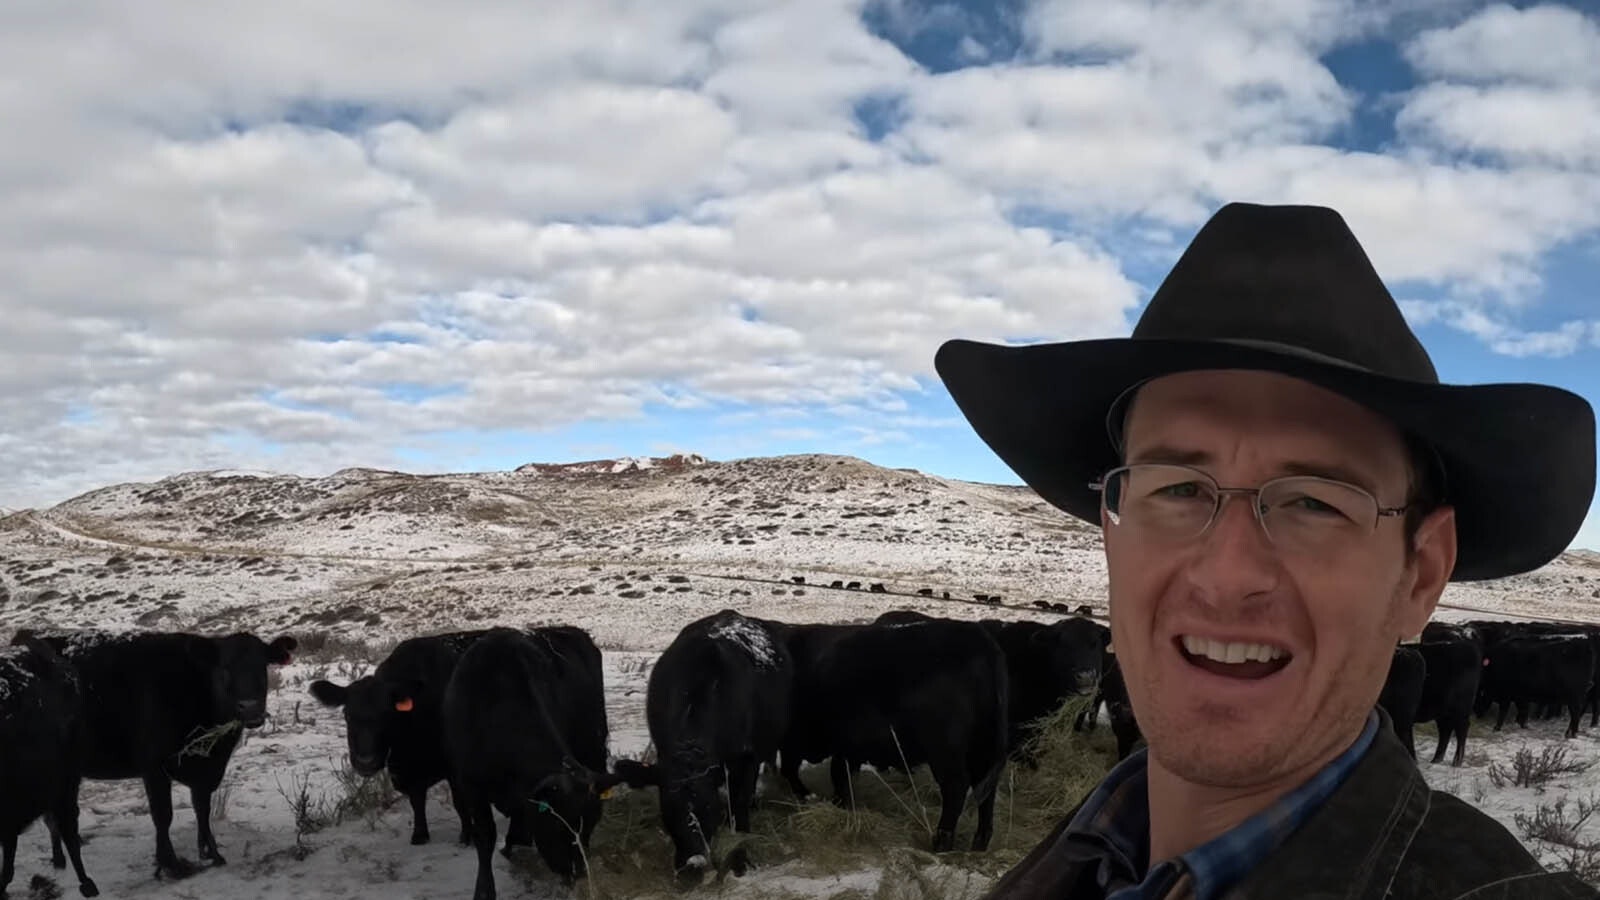 Peter Burgess is a fourth-generation Wyoming rancher who gives people a glimpse of his family's Western lifestyle through his YouTube channel, The Wyoming Way.